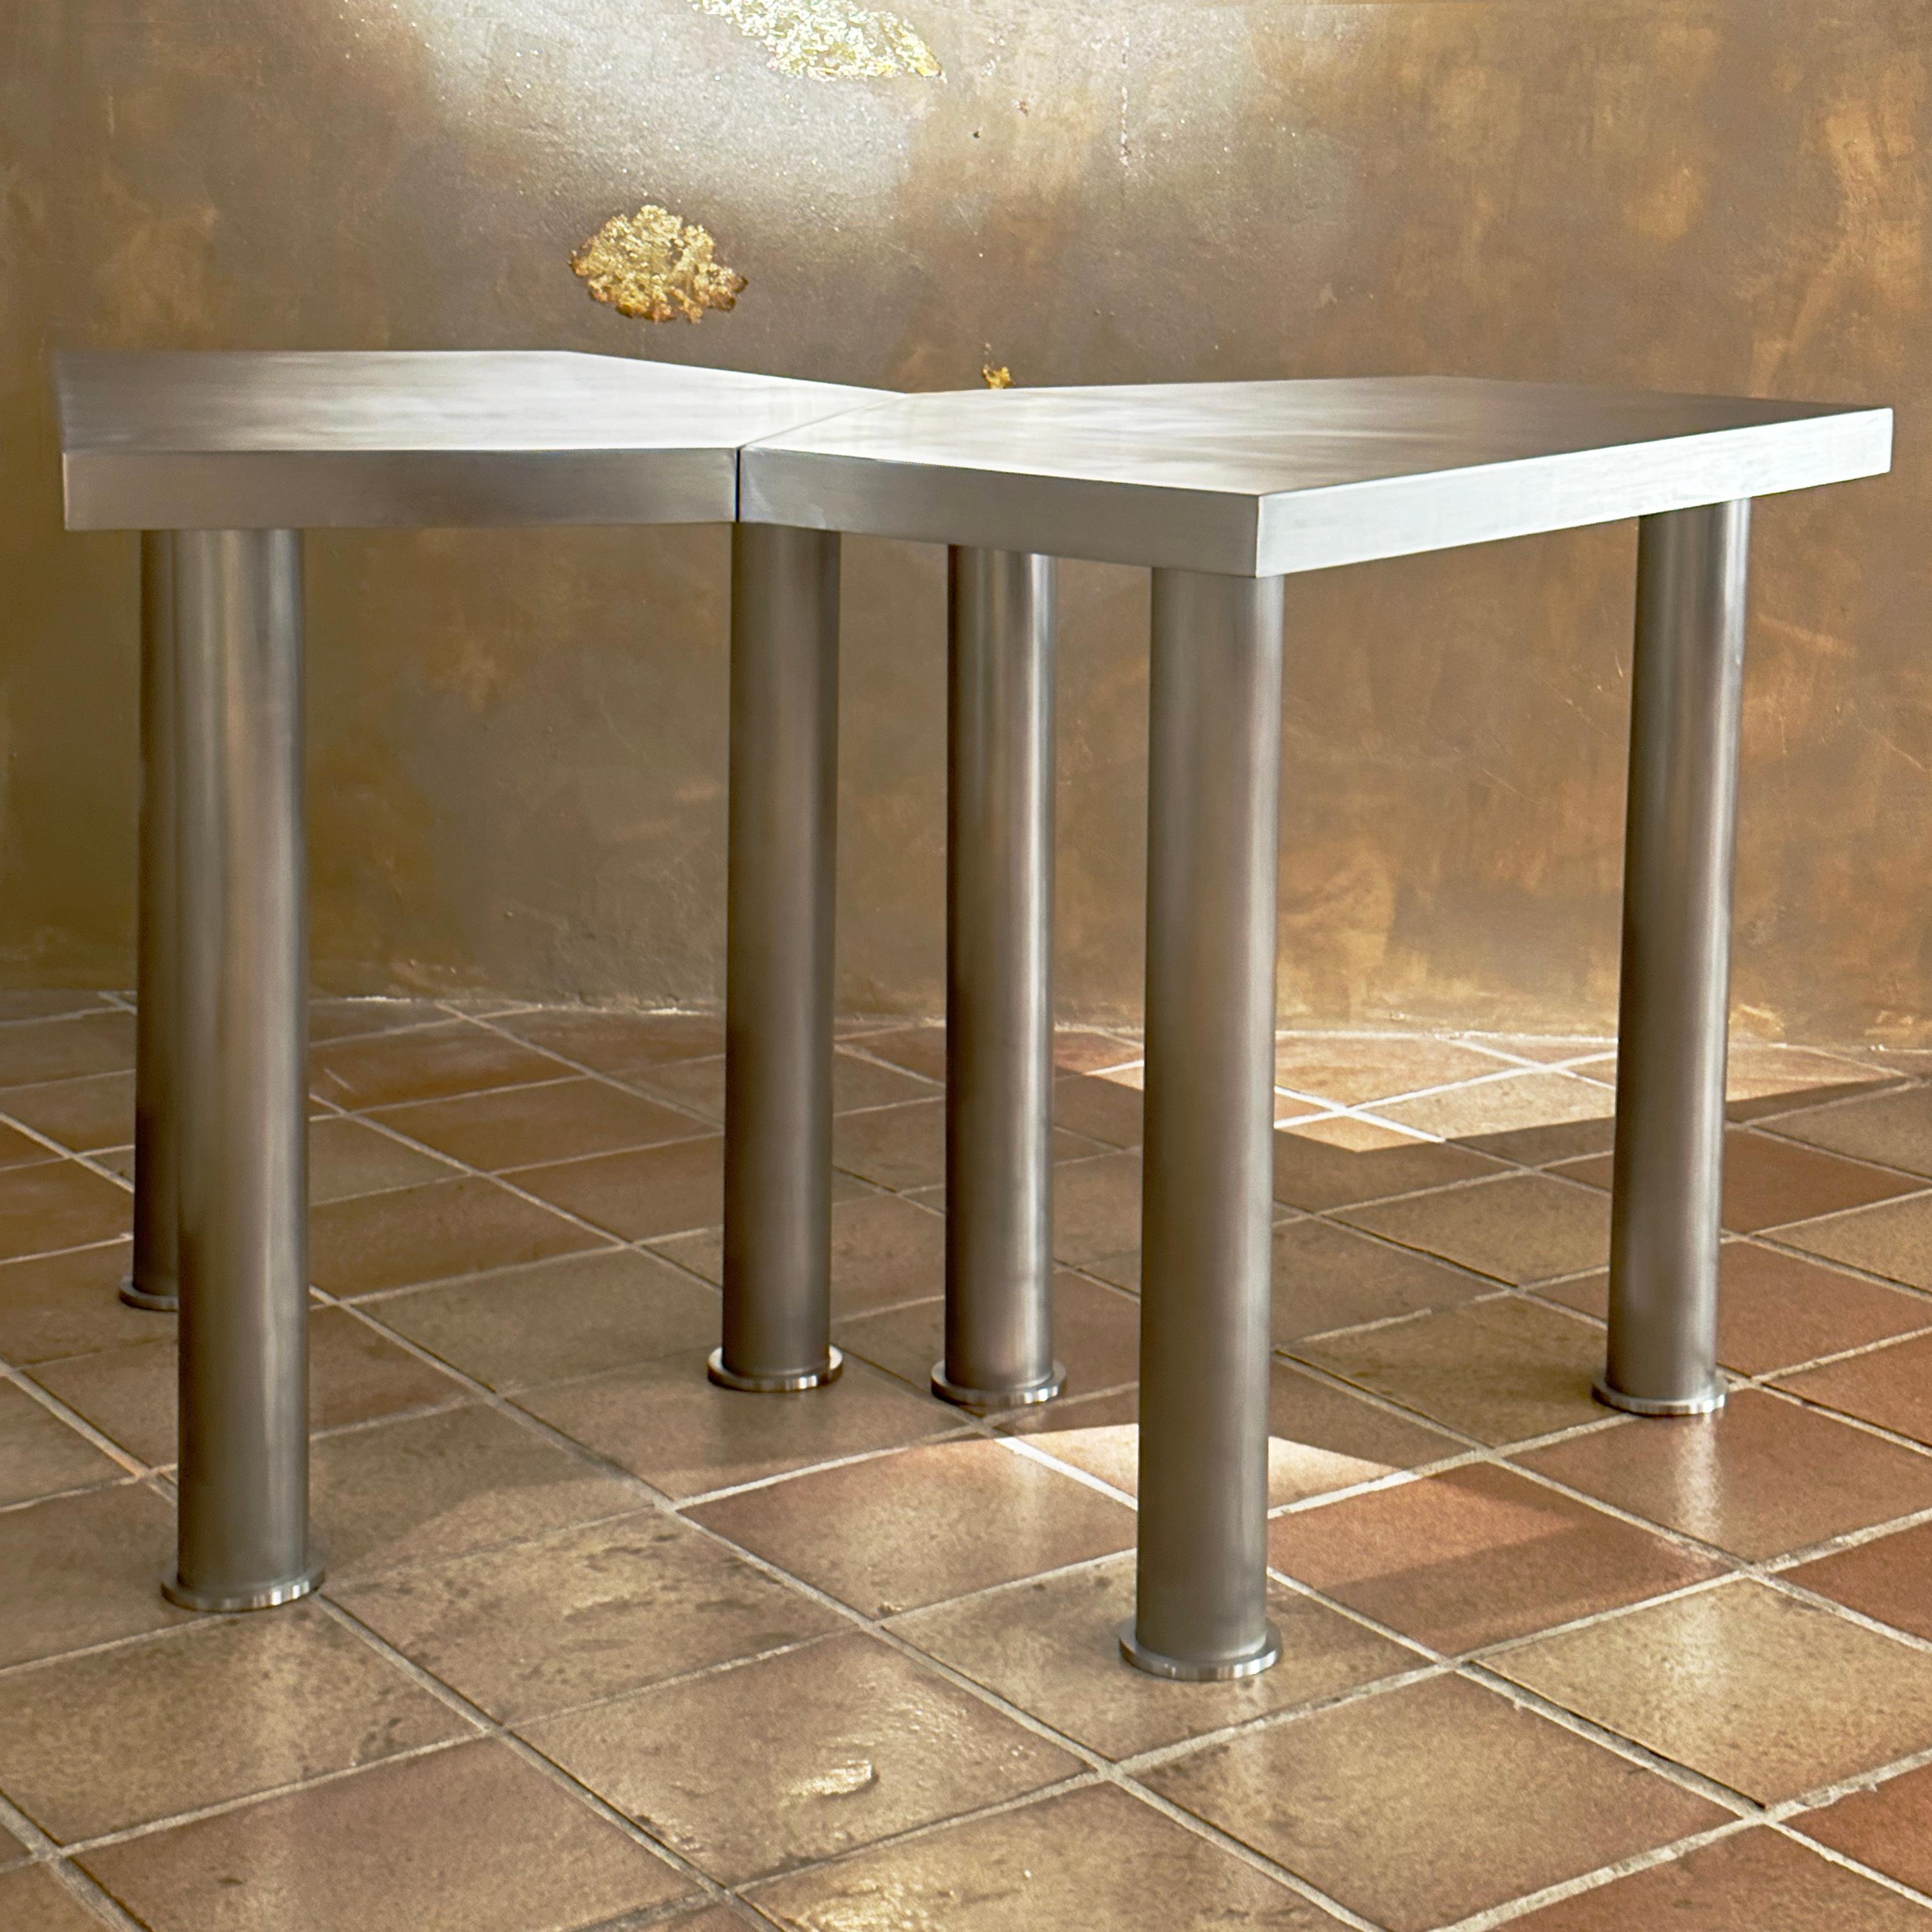 “Running Gun” Accent Table Set, Iron, JAMES VINCENT MILANO, Italy, 2023

Pentagonal accent table with removable tripod legs. 
For use individually or as extensions to complete “Running Gun” Dining Table.
Polished and brushed iron.
Handcrafted